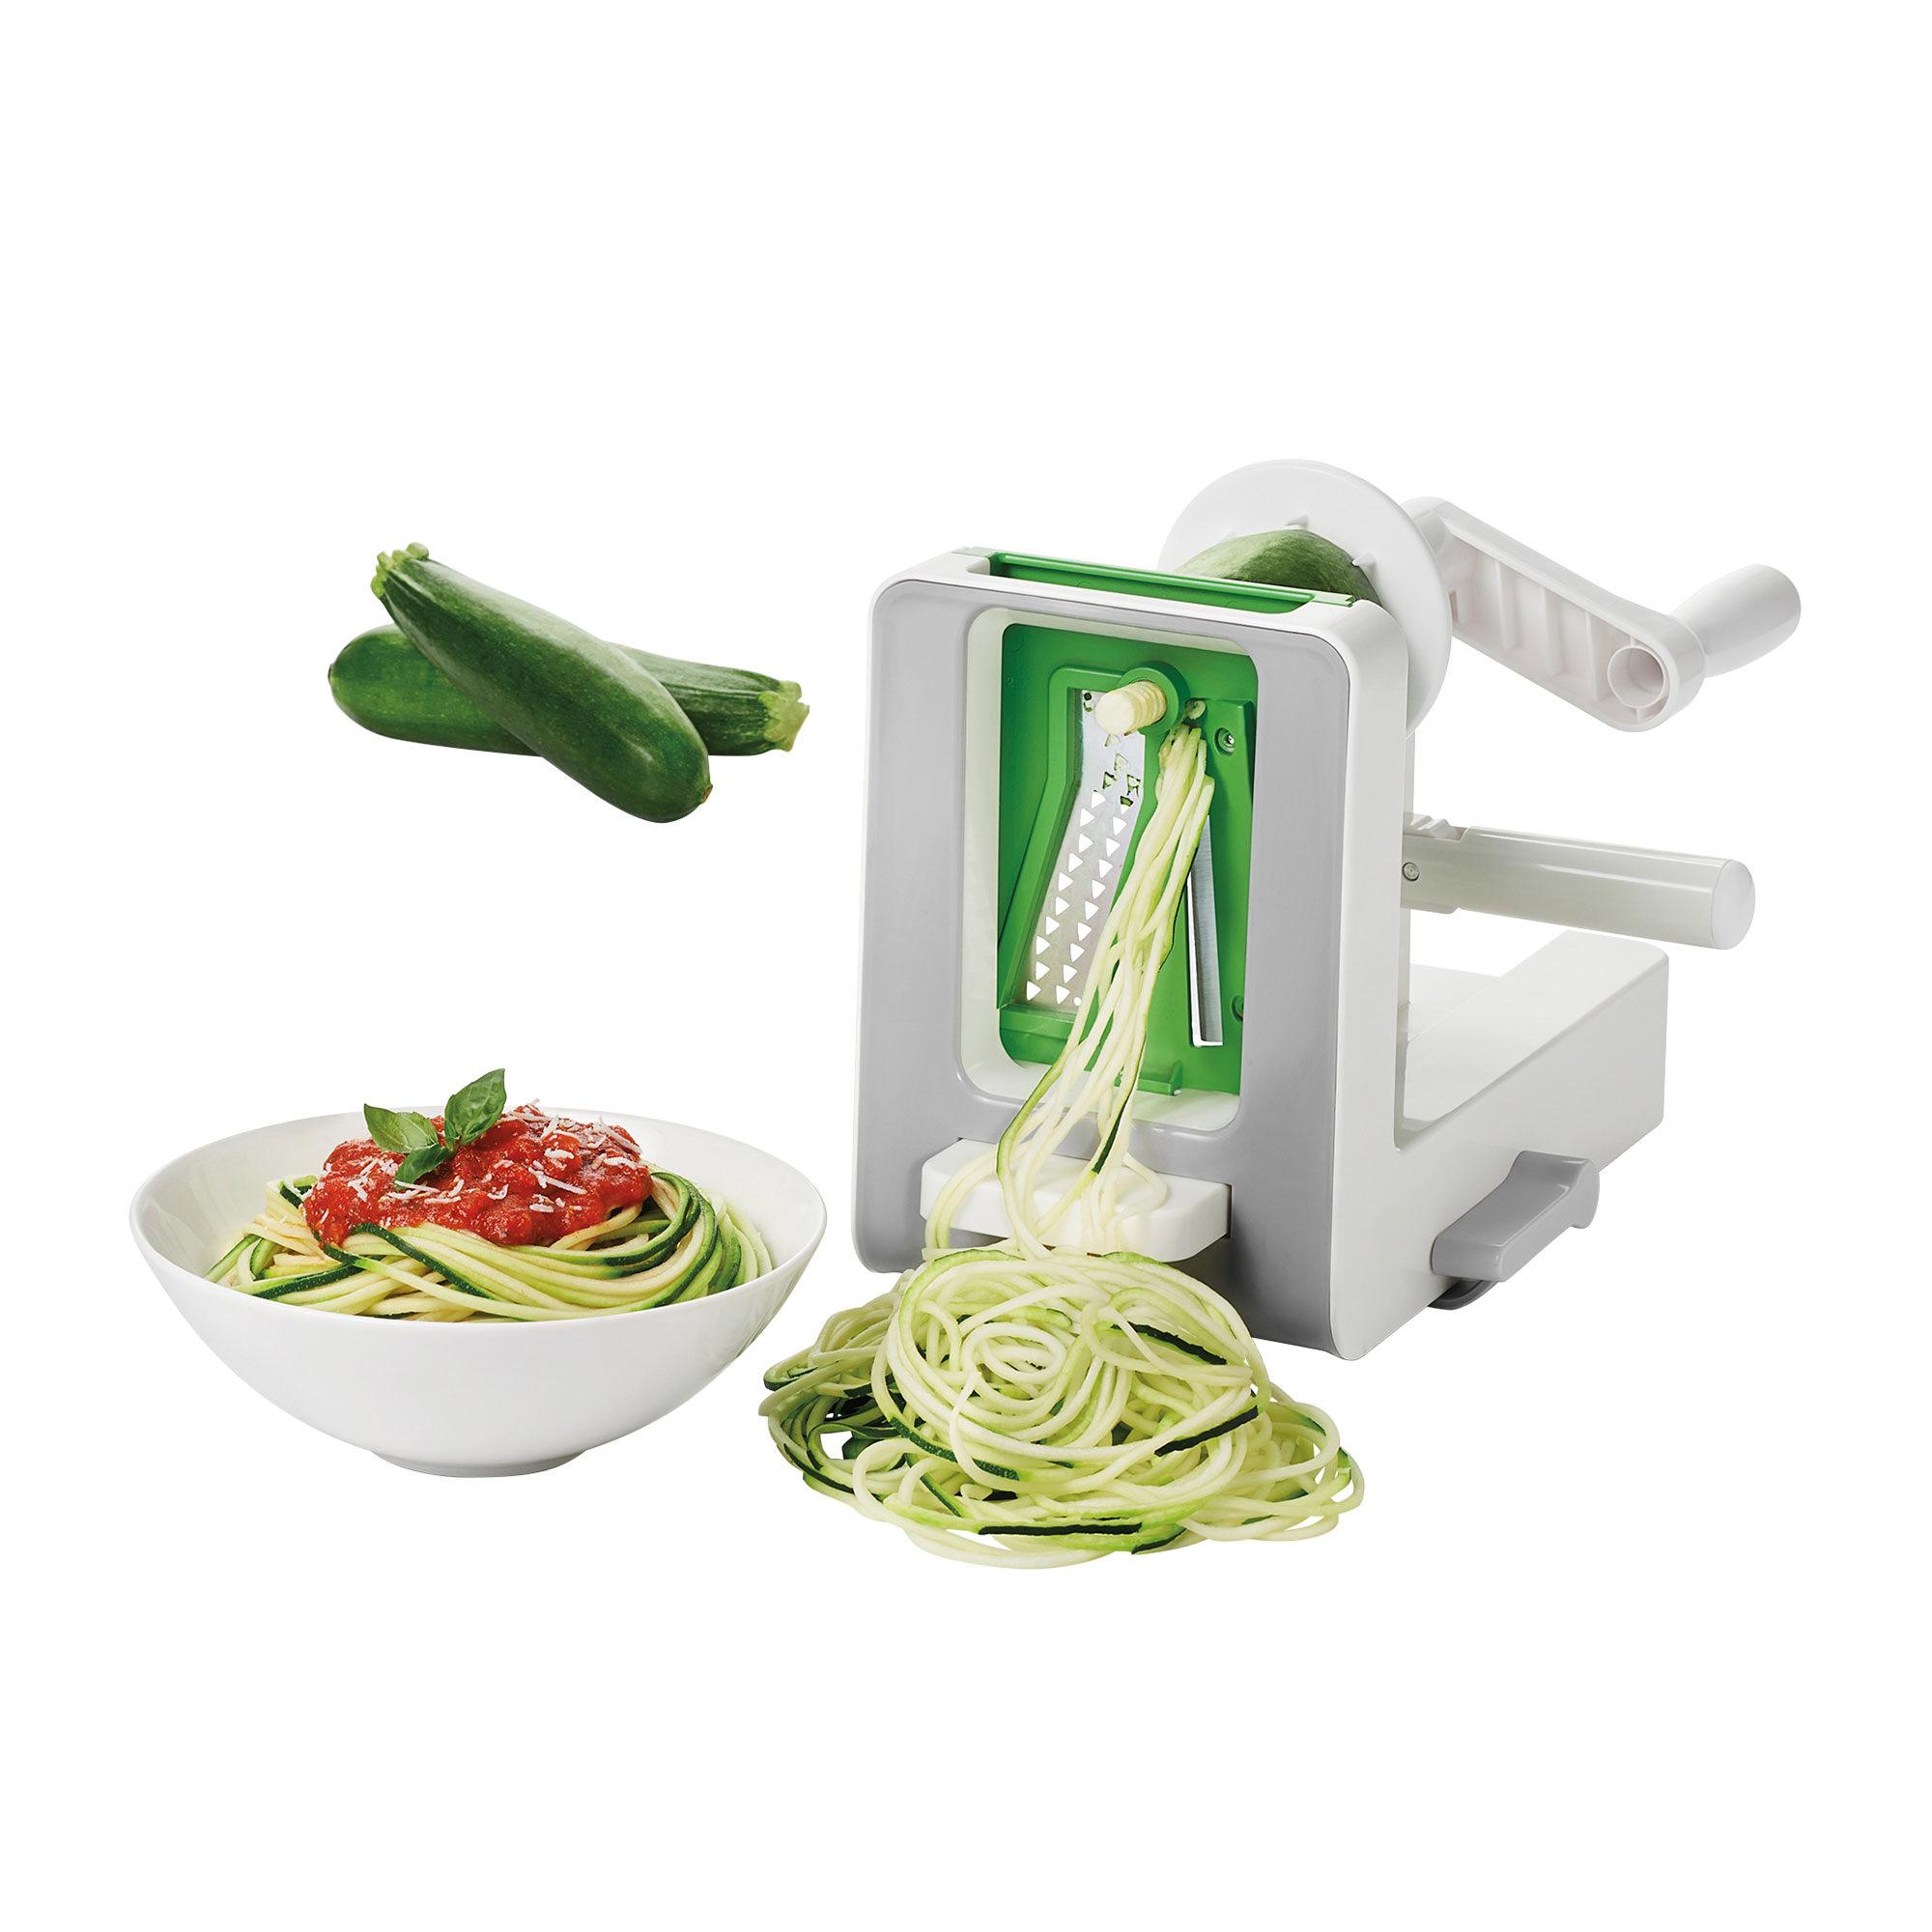 OXO Good Grips Tabletop Spiralizer Image 5